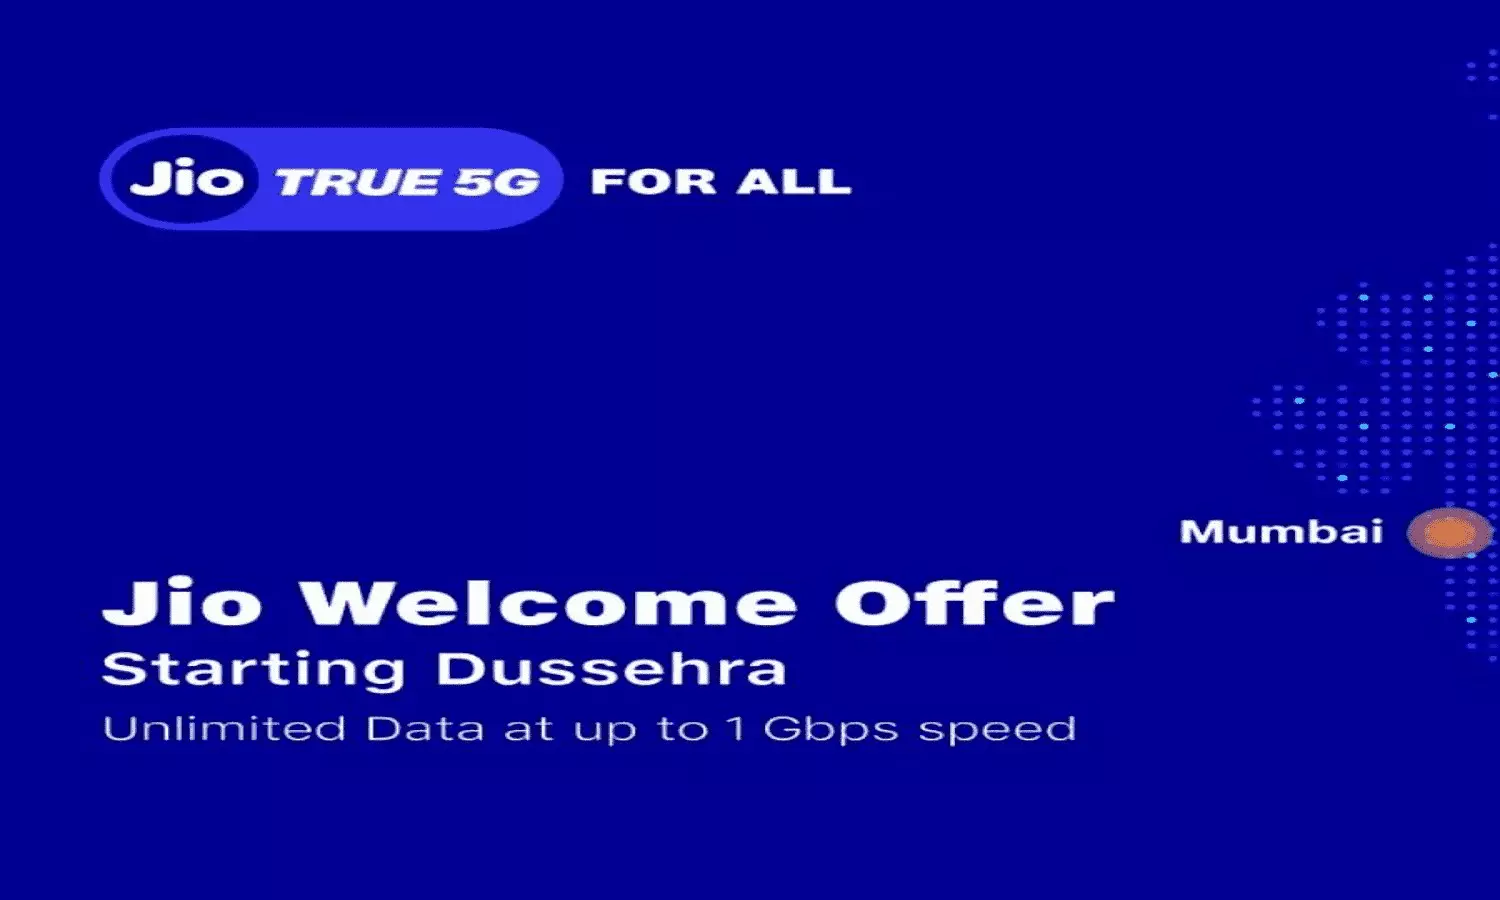 Reliance Jio 5G Welcome Offer